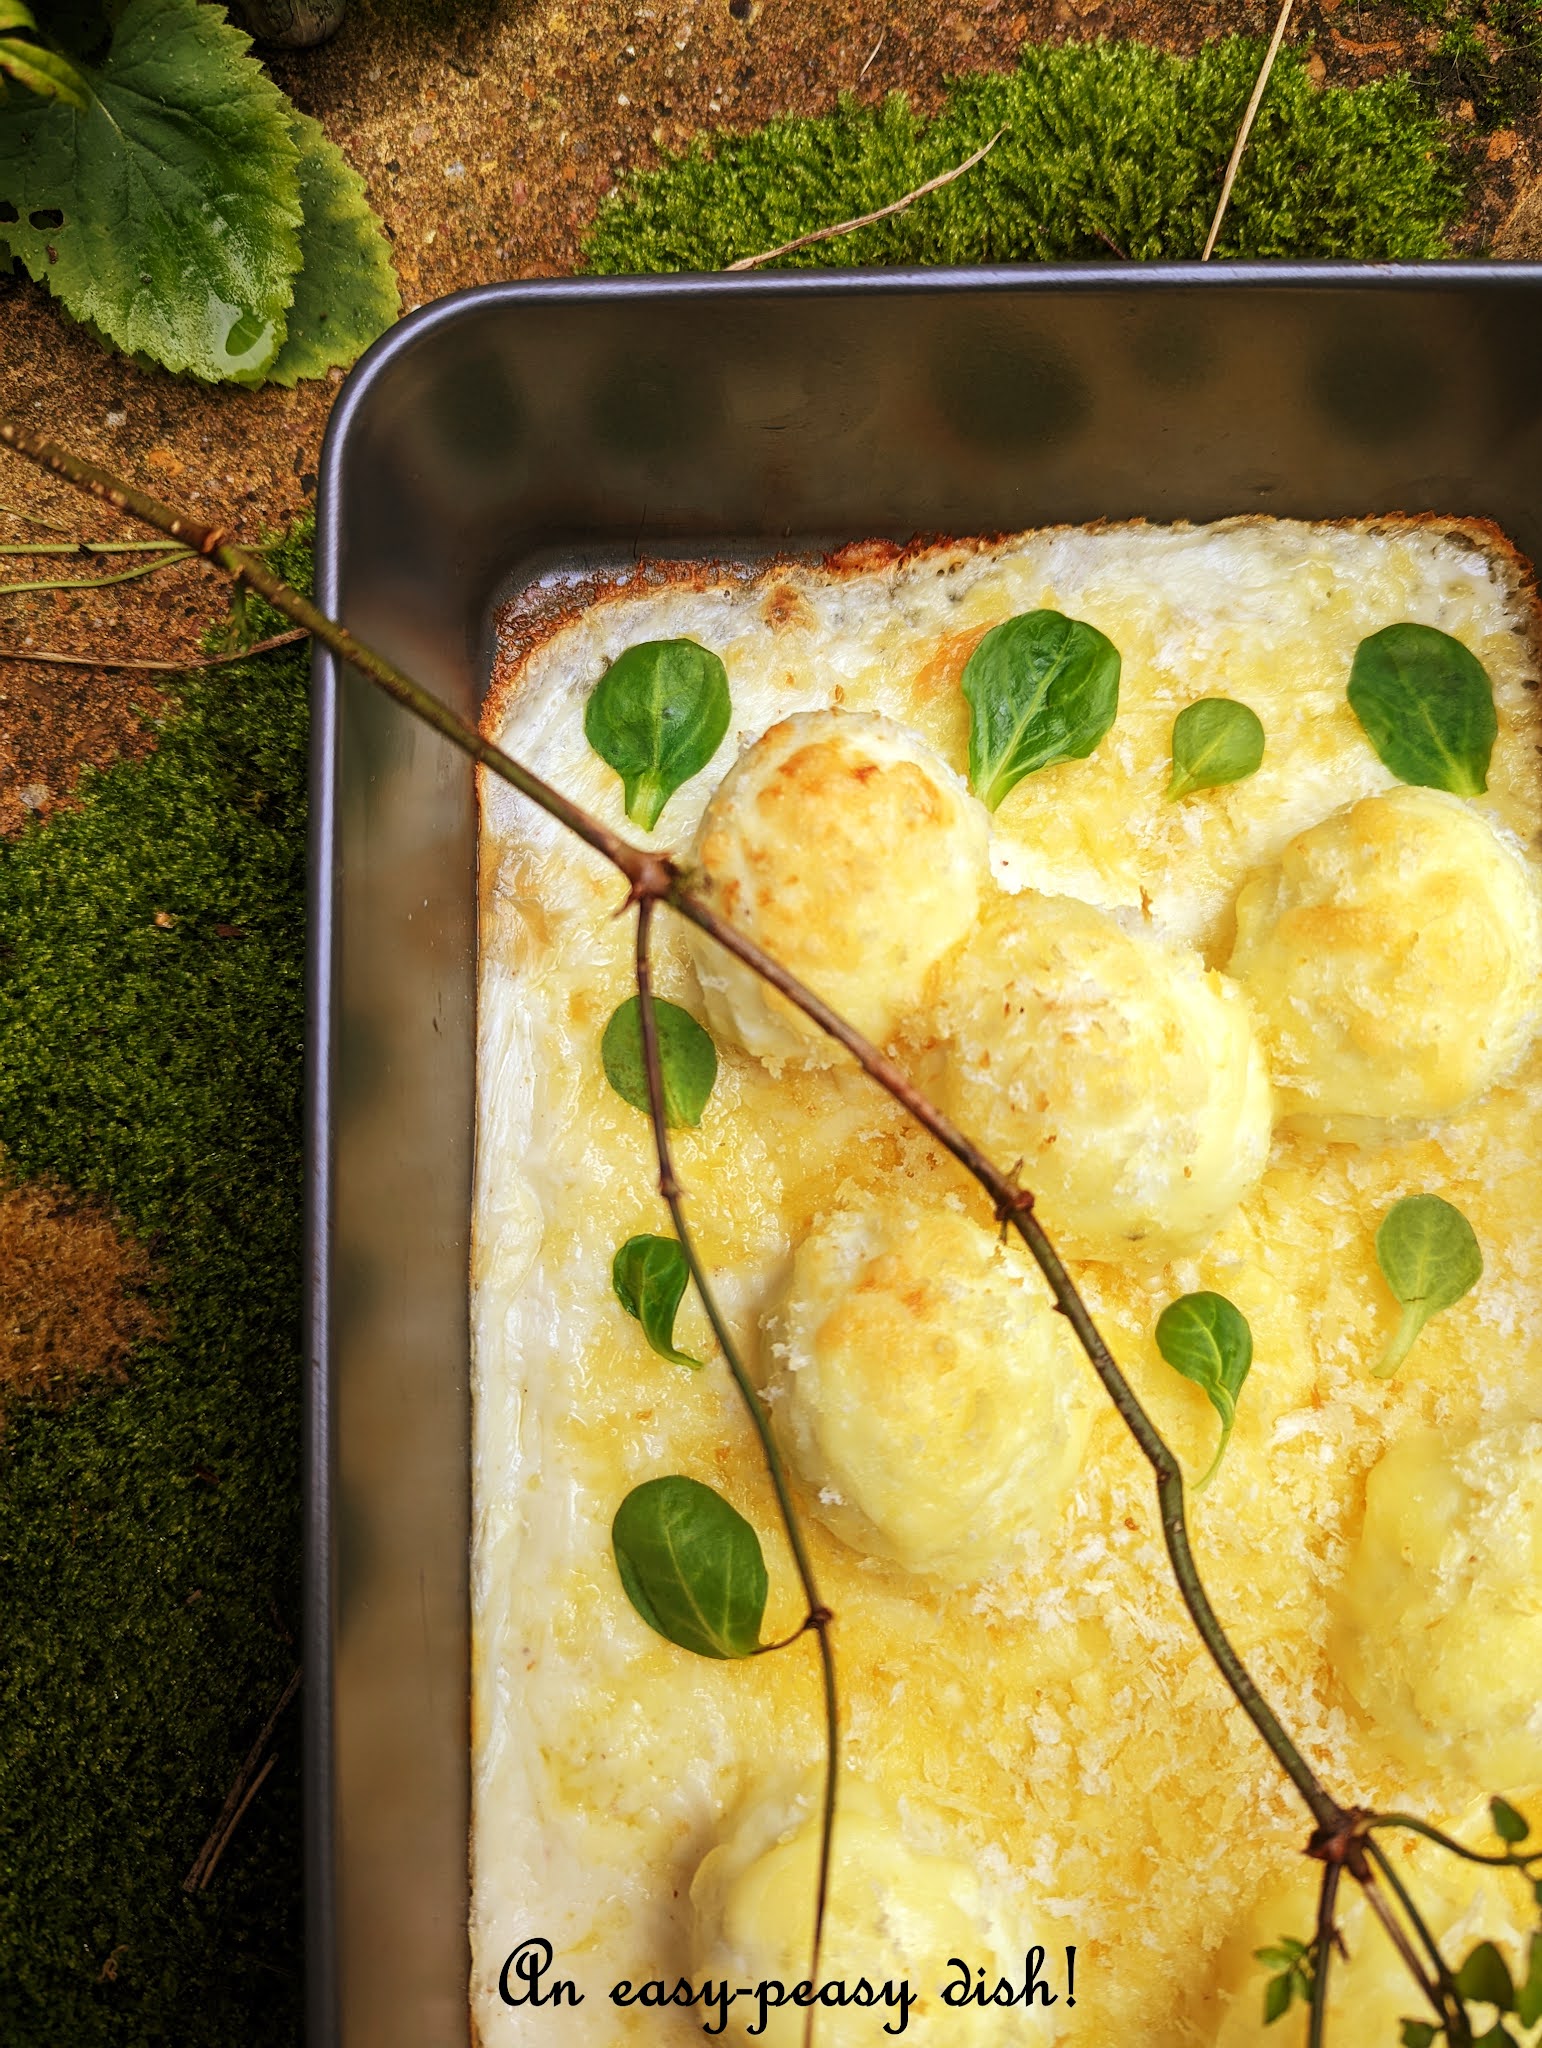 EGG GRATIN WITH CHEDDAR - Easy-peasy dish...